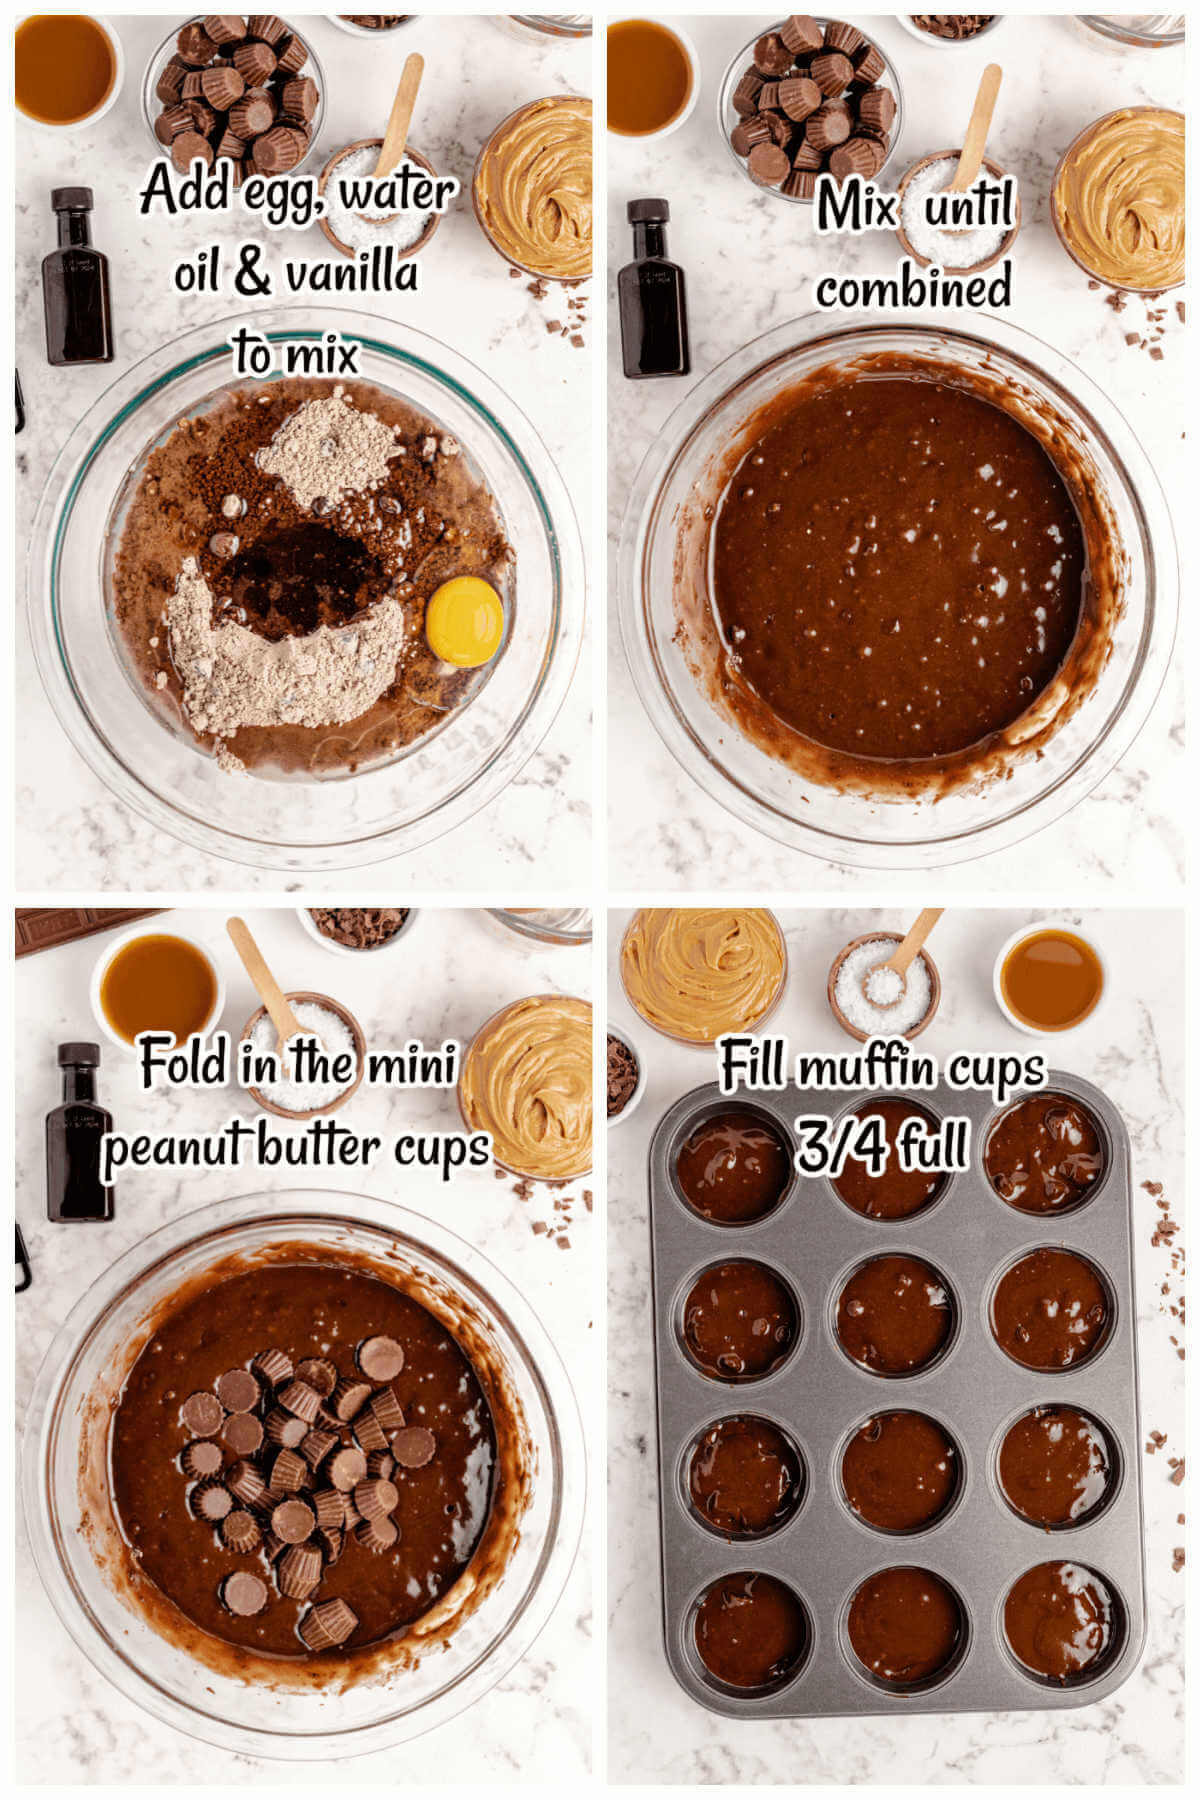 1st set of instructions for making the Brownie Peanut Butter Bites. 